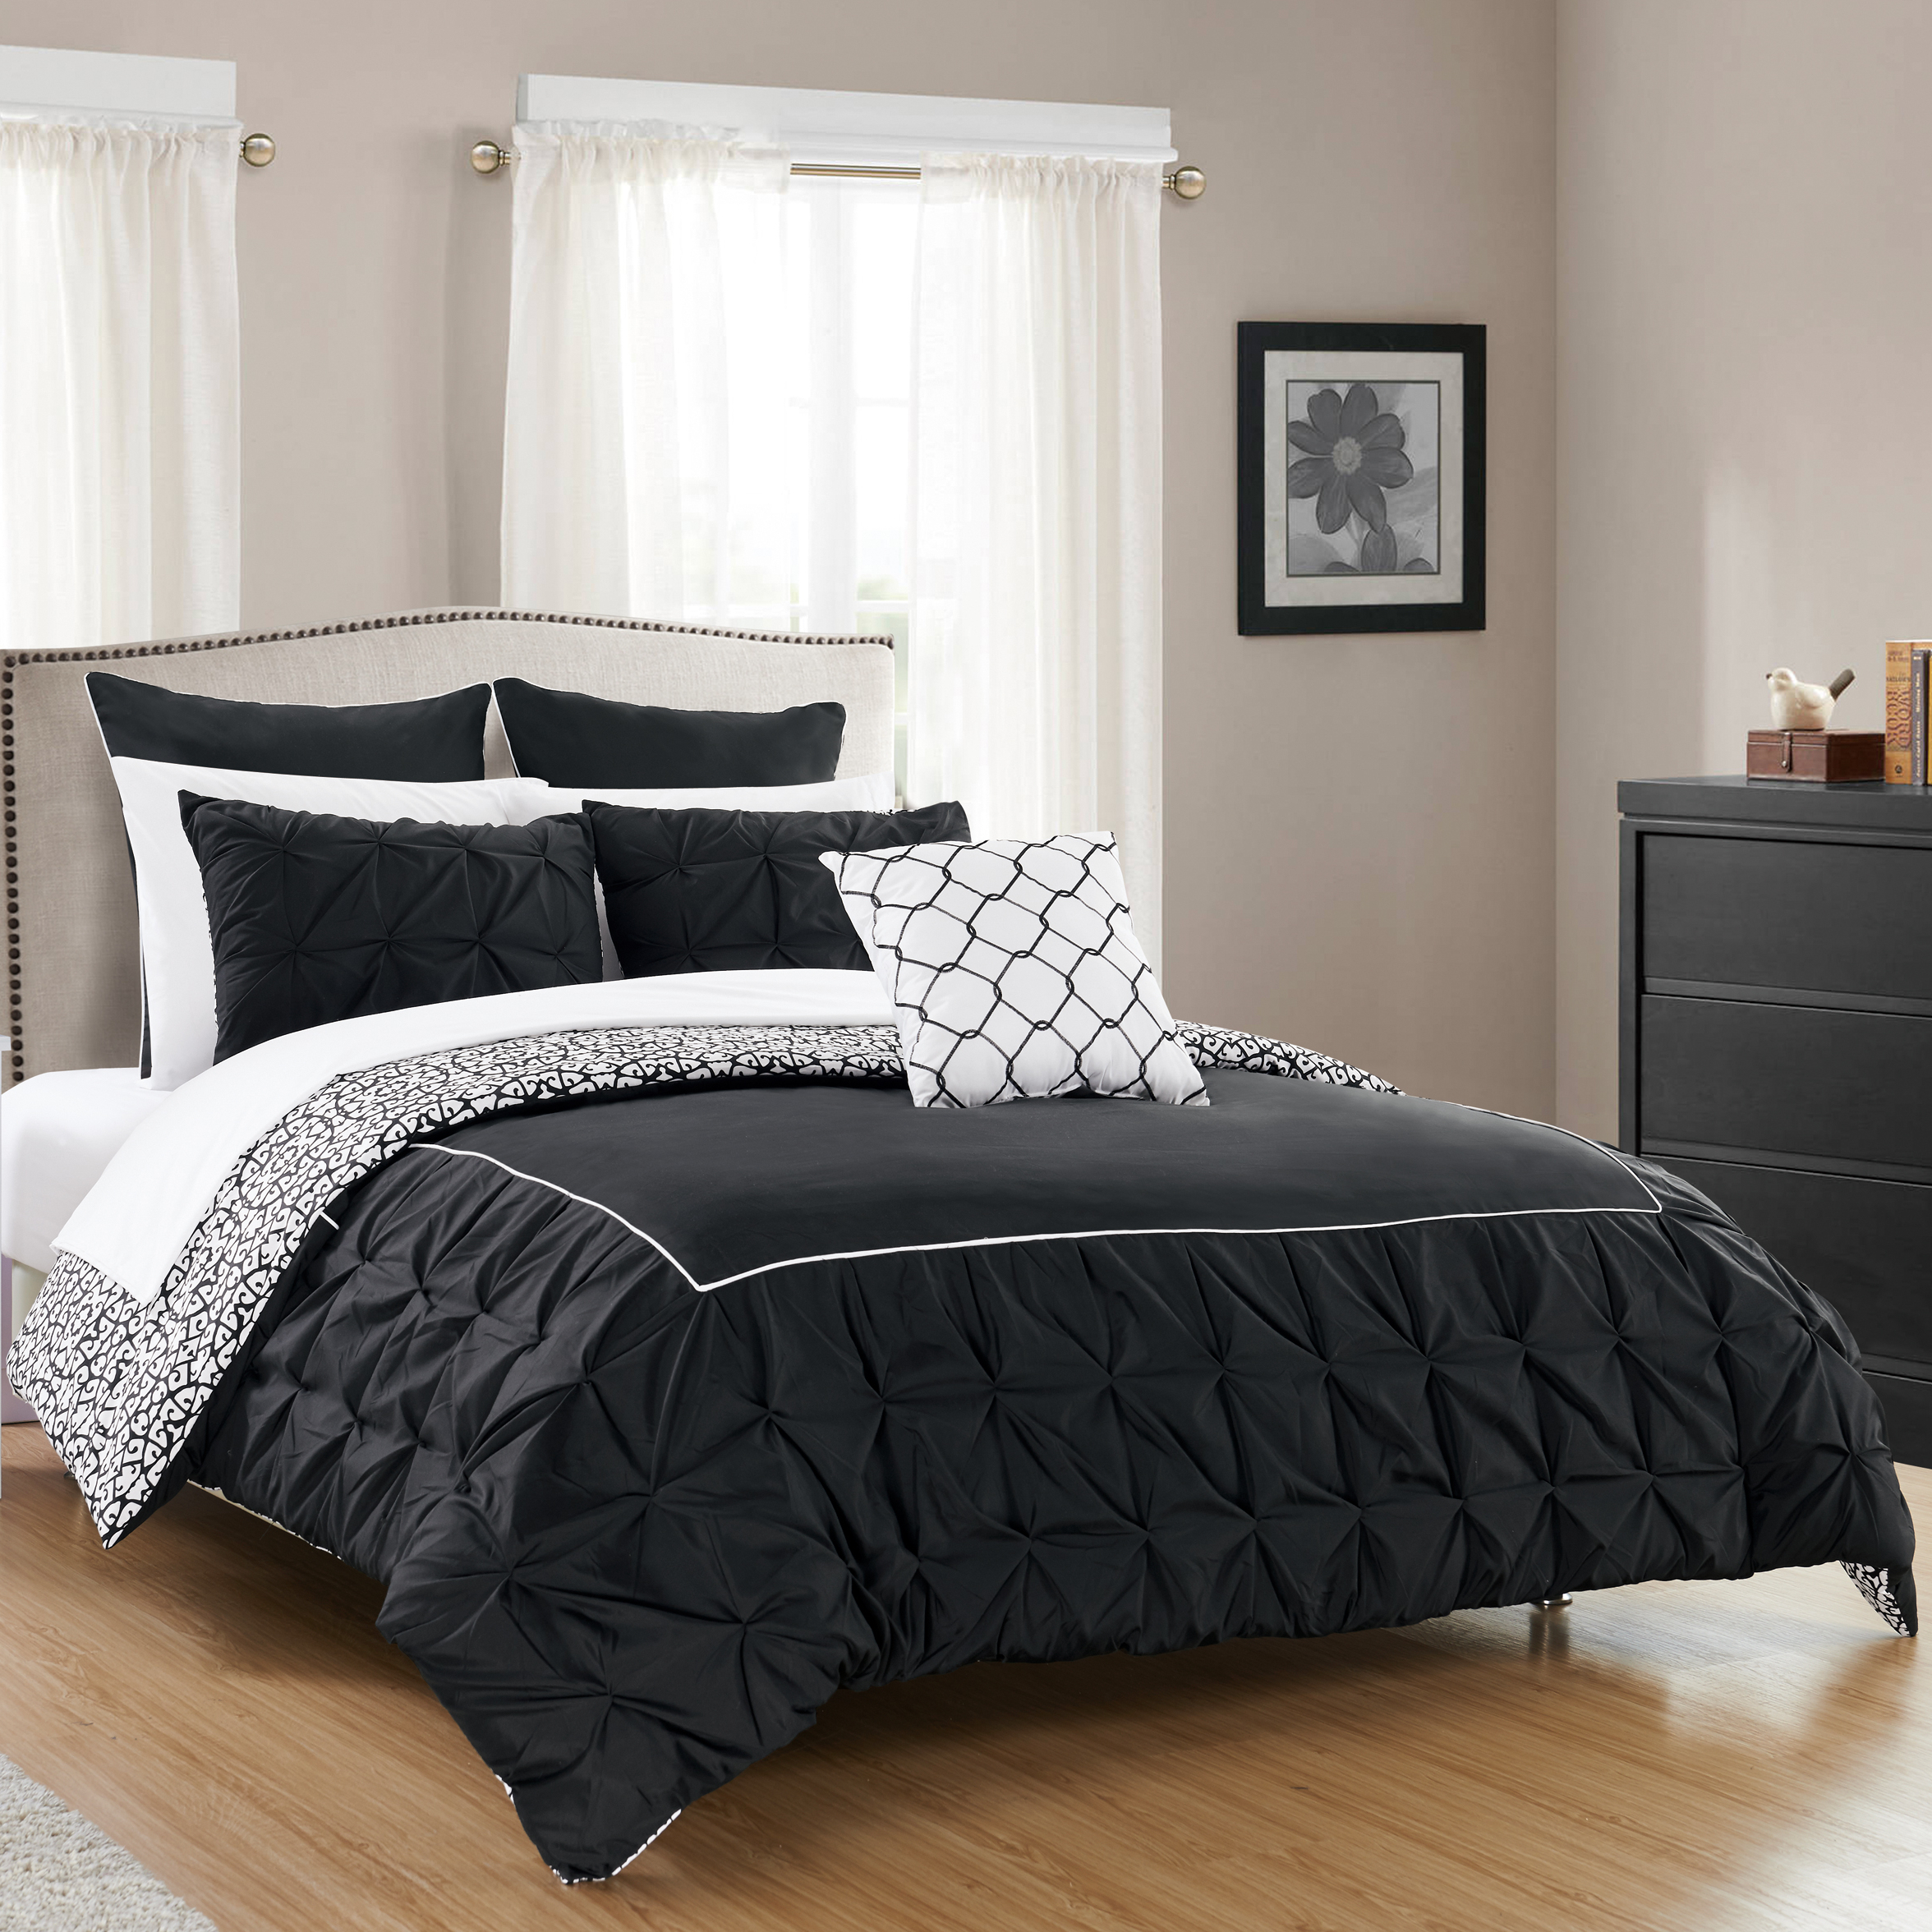 Keppel 10 Piece Comforter Set Complete Bed In A Bag Pleated Ruffles And Reversible Print Bedding With Sheet Set - Black, Queen